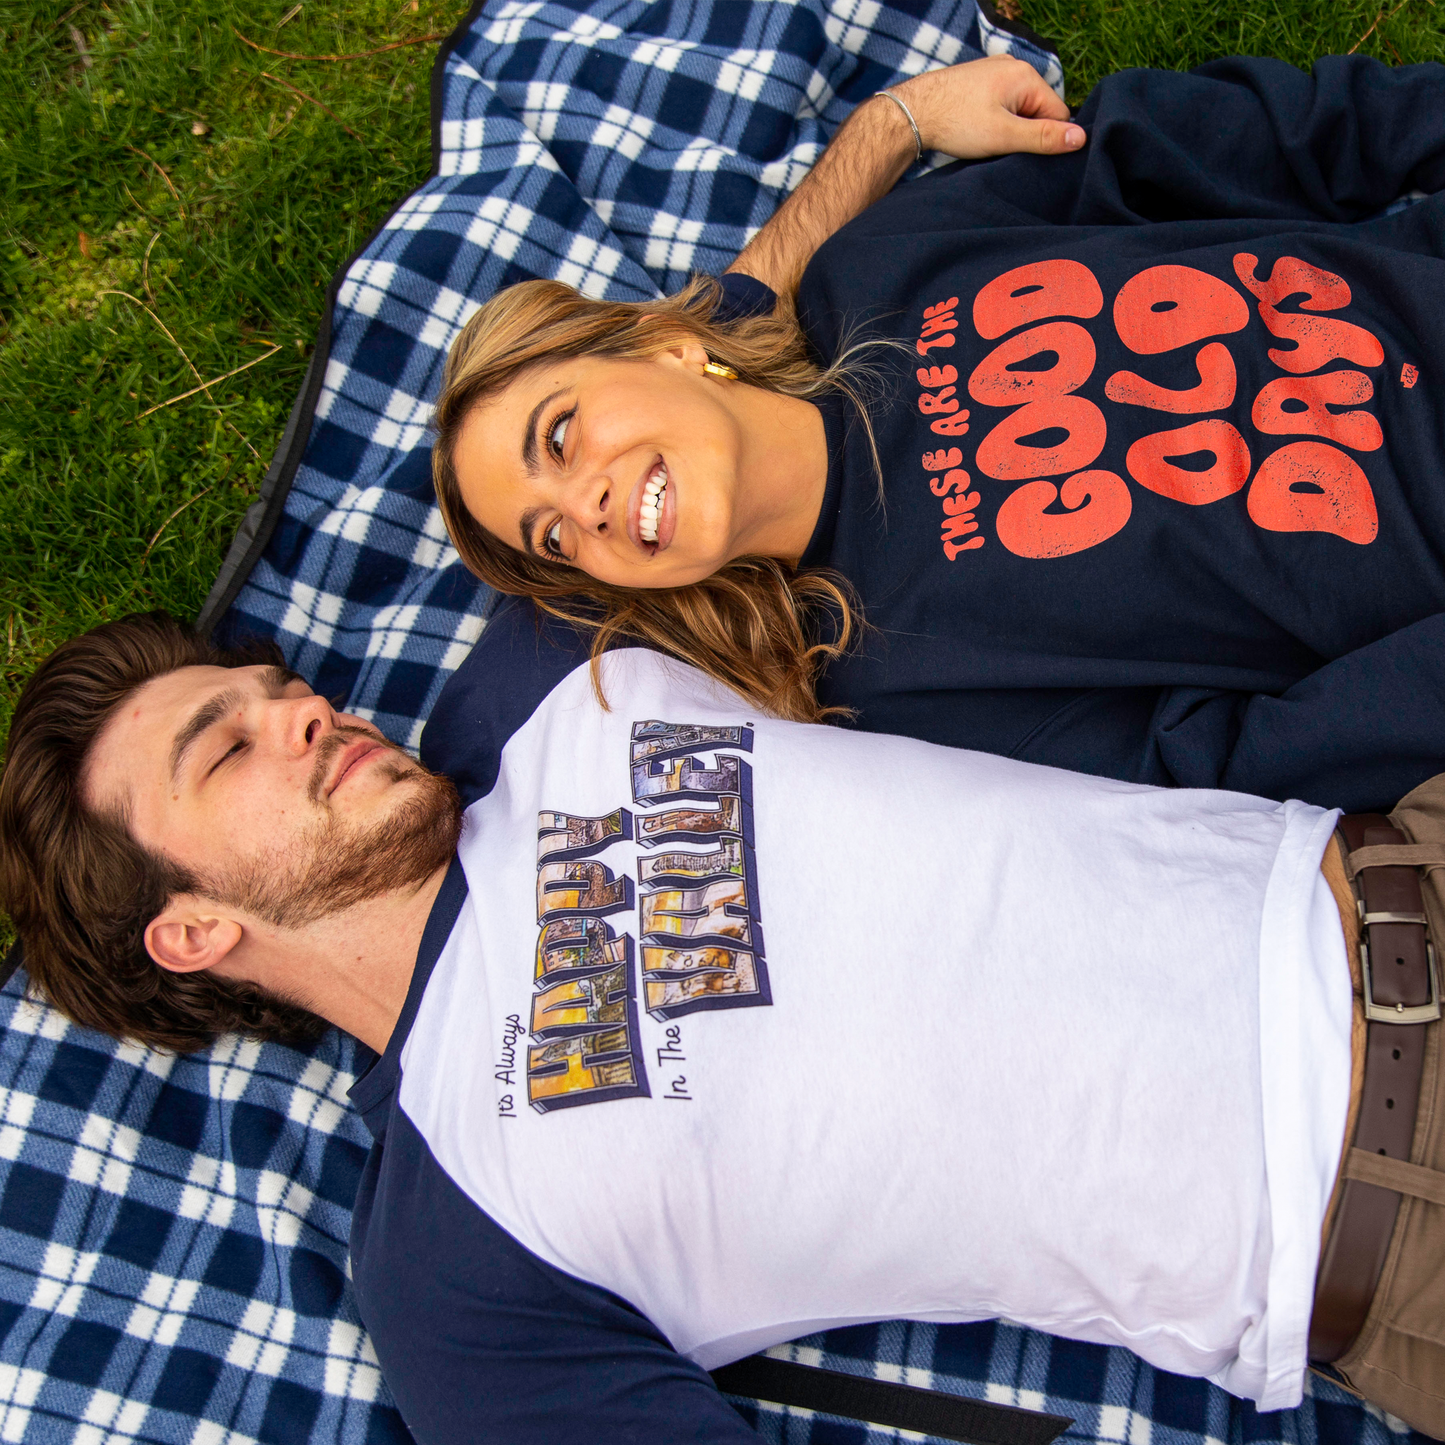 These Are the Good Old Days Sweatshirt